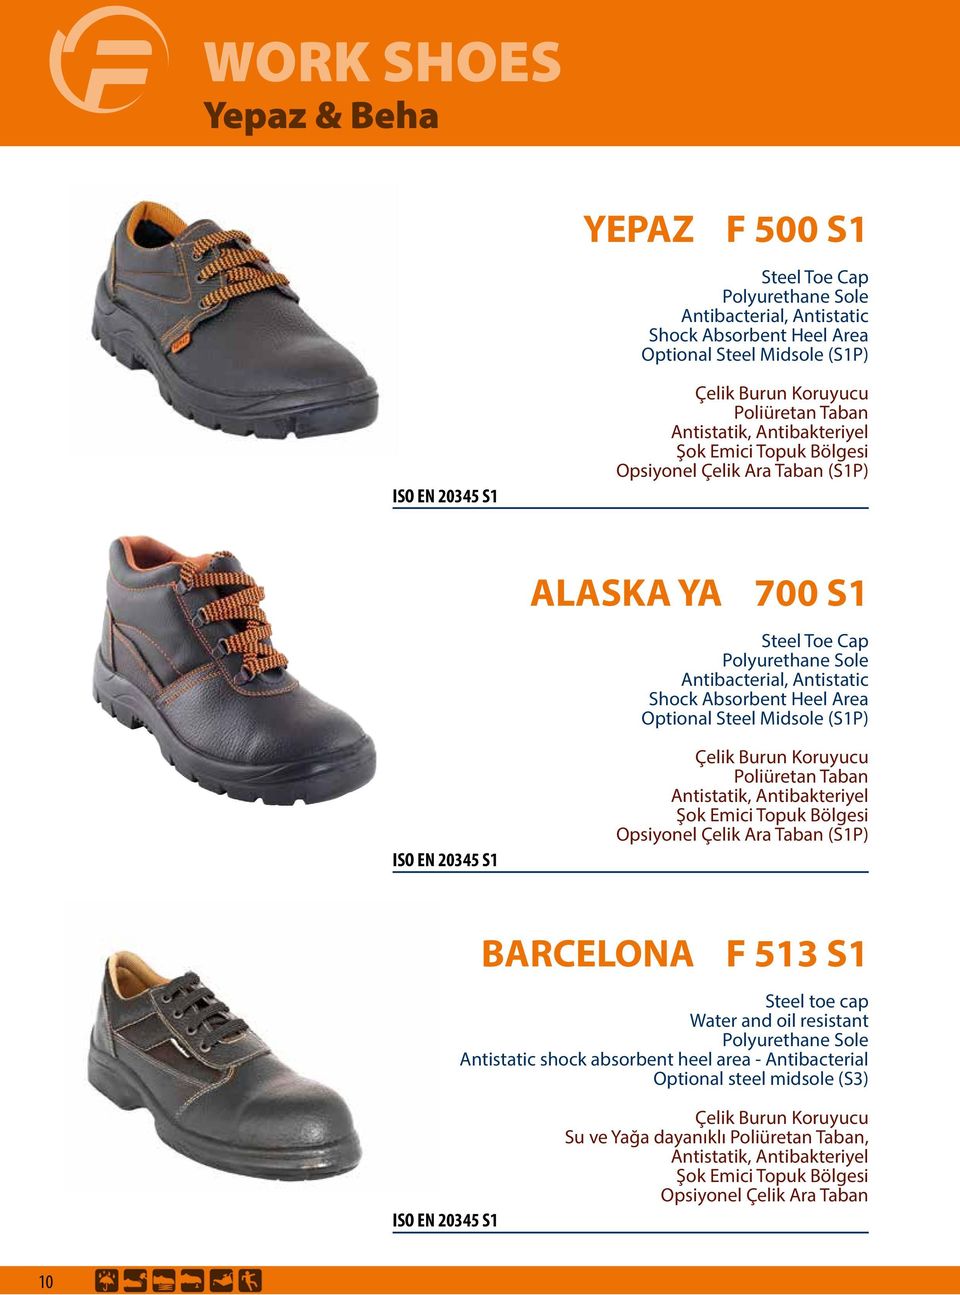 Midsole (S1P) BARCELONA F 513 S1 Steel toe cap Water and oil resistant Antistatic shock absorbent